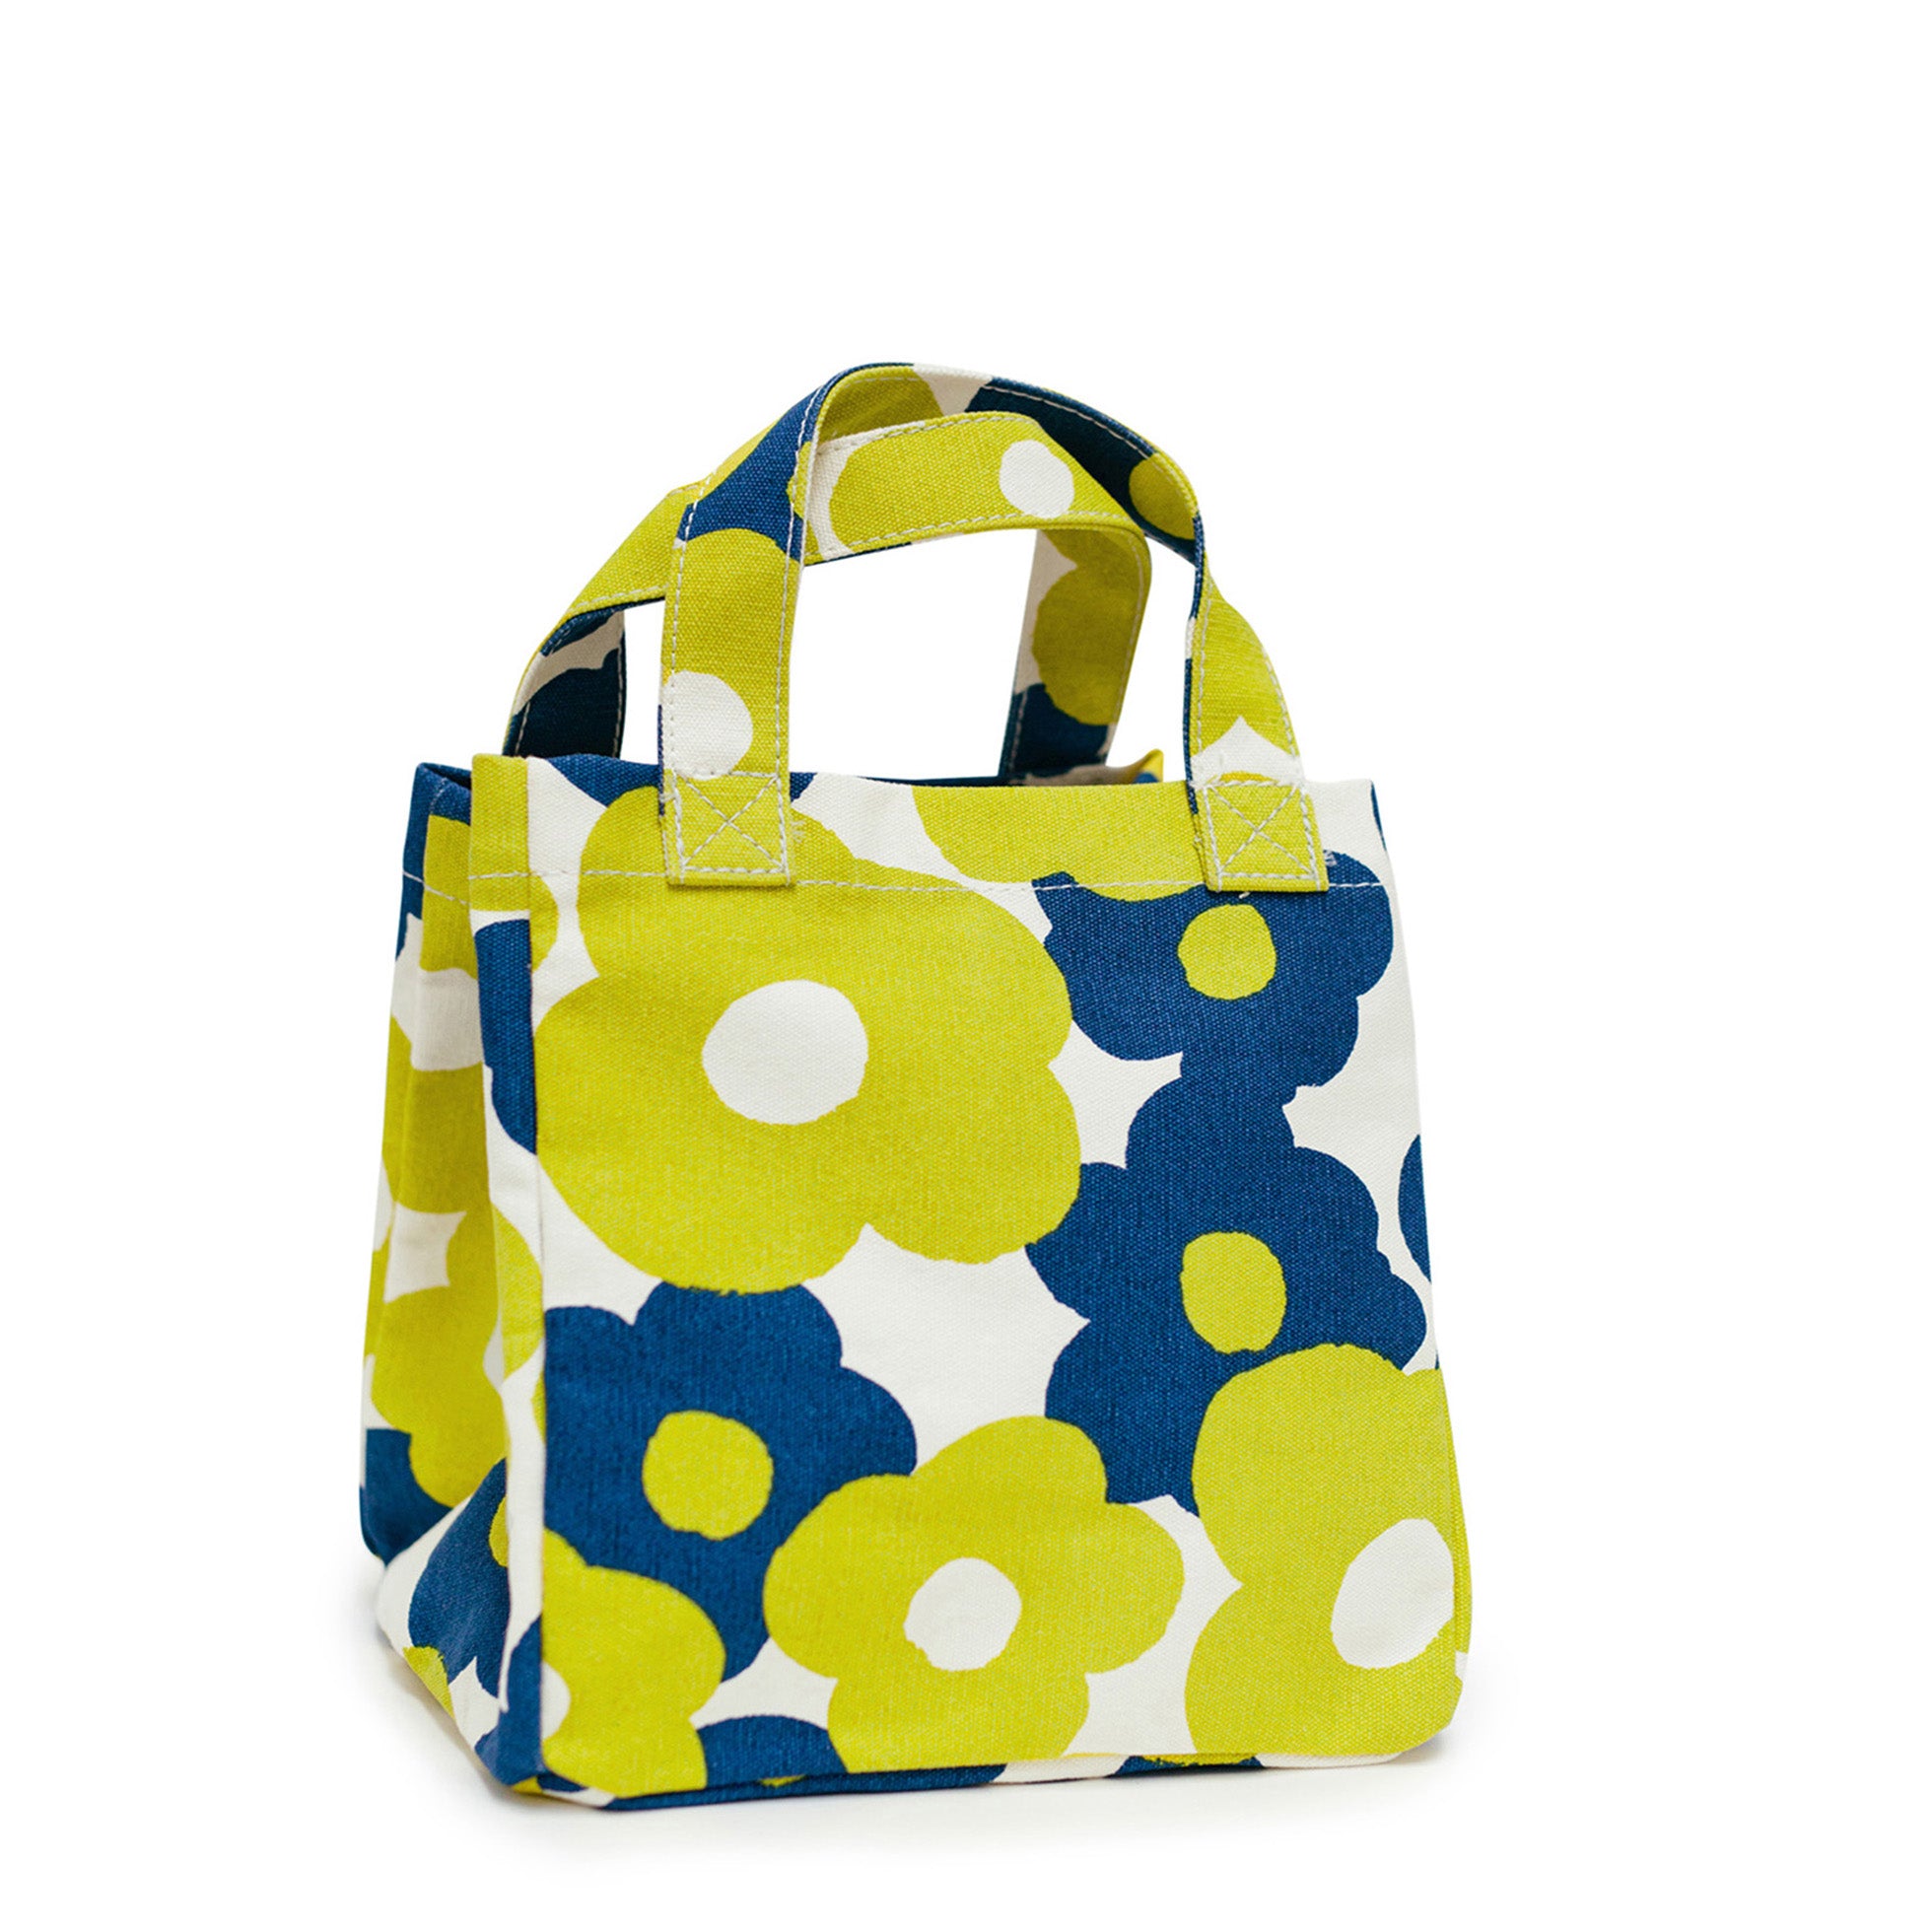 NEW with Tags - Lunch/Tote Bag for Women Lunch Box Insulated Lunch